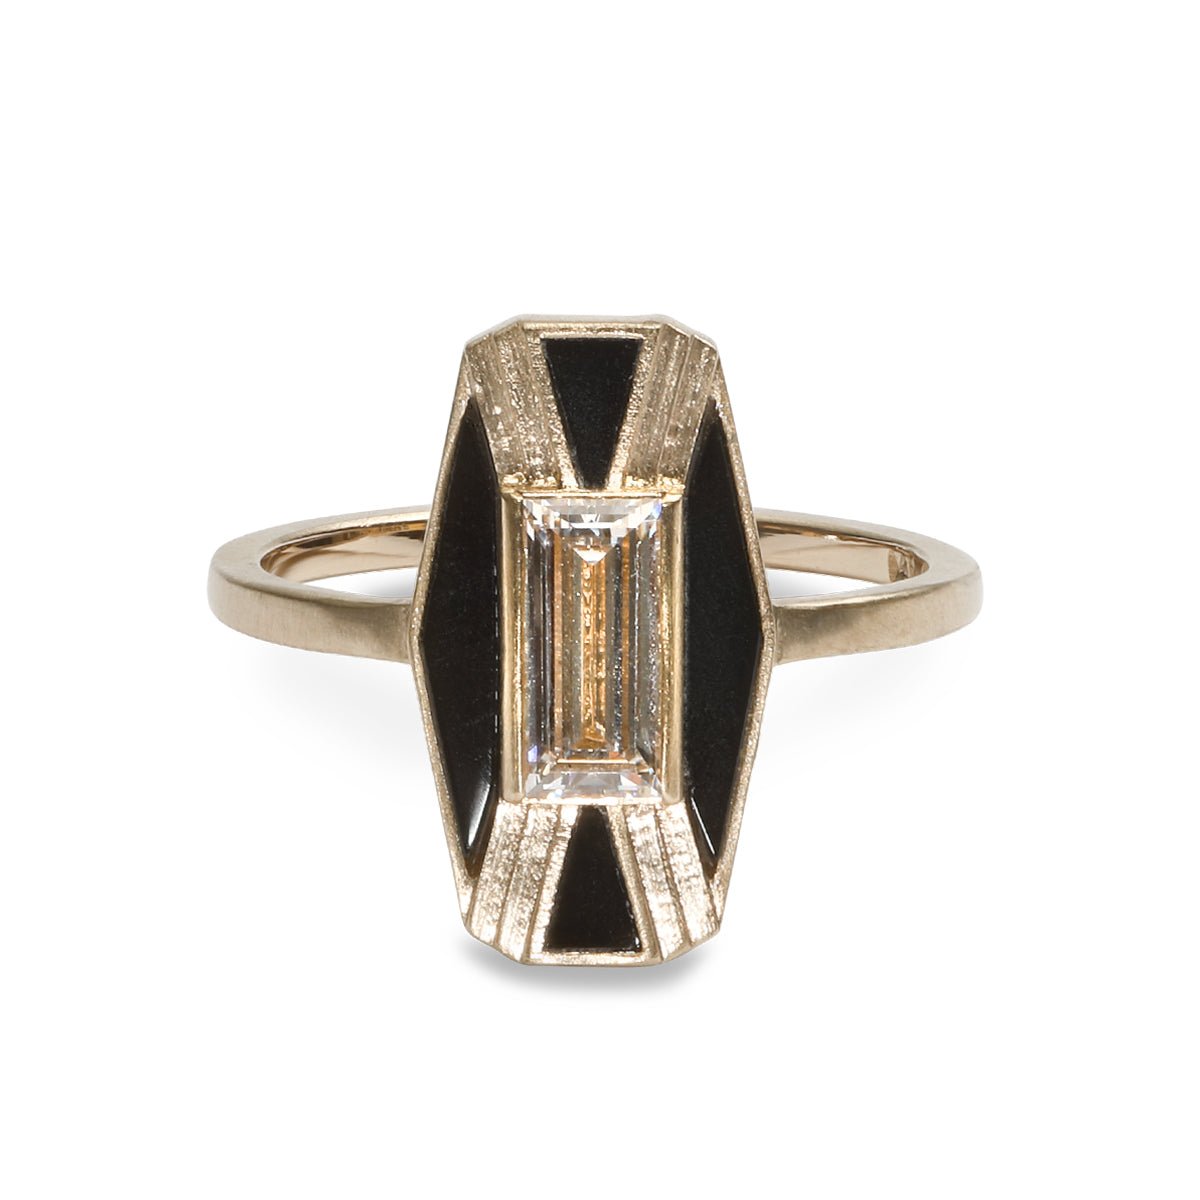 Imber cocktail ring with lab-grown baguette diamond focal and Oregon black jasper inlay. Set in 14K recycled gold.